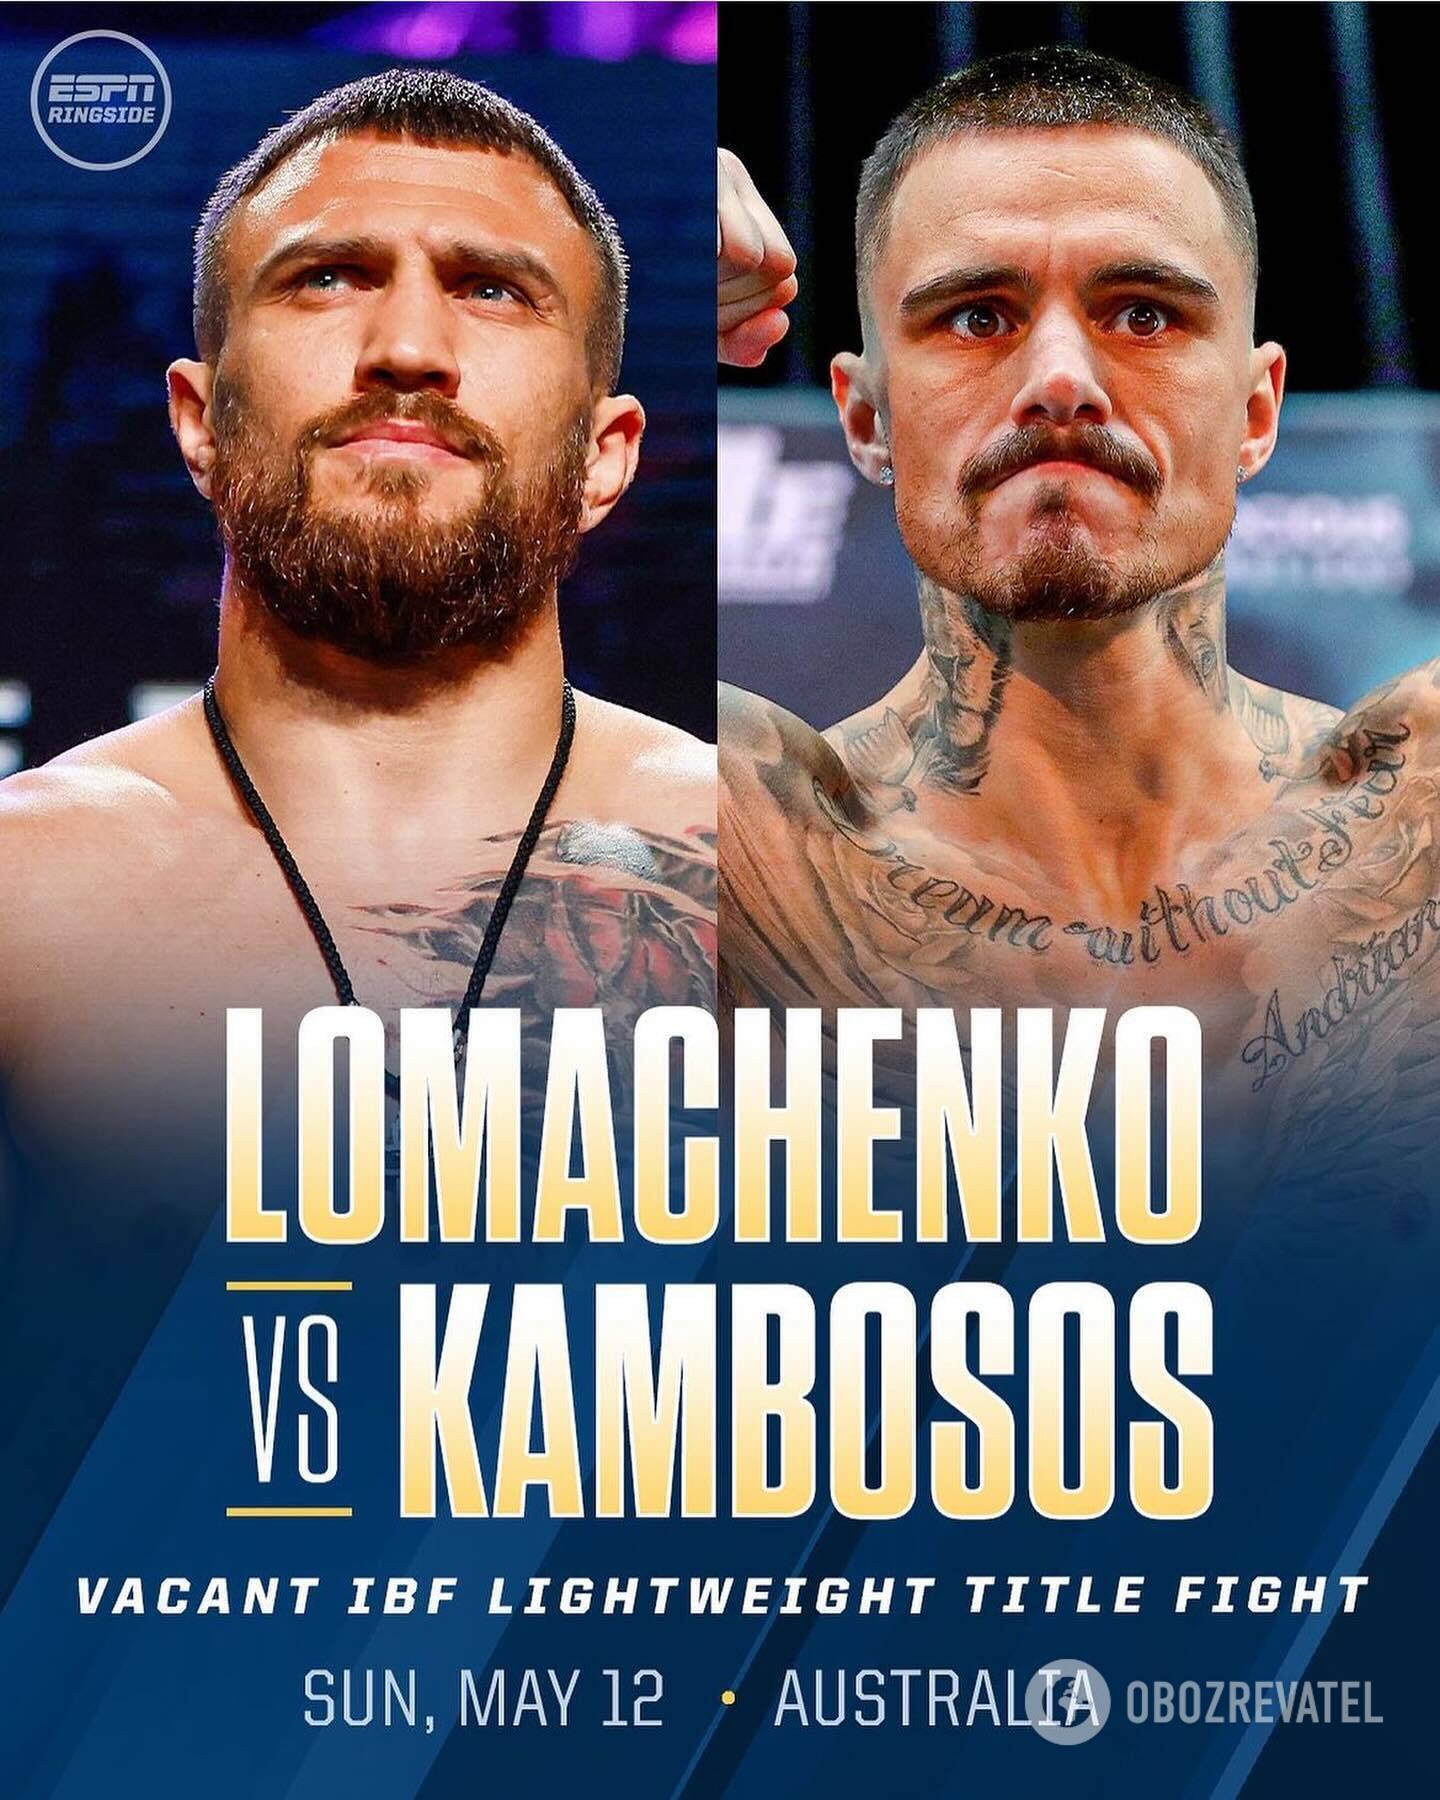 Bookmakers unexpectedly changed their quotes a week before the Lomachenko-Kambosos fight